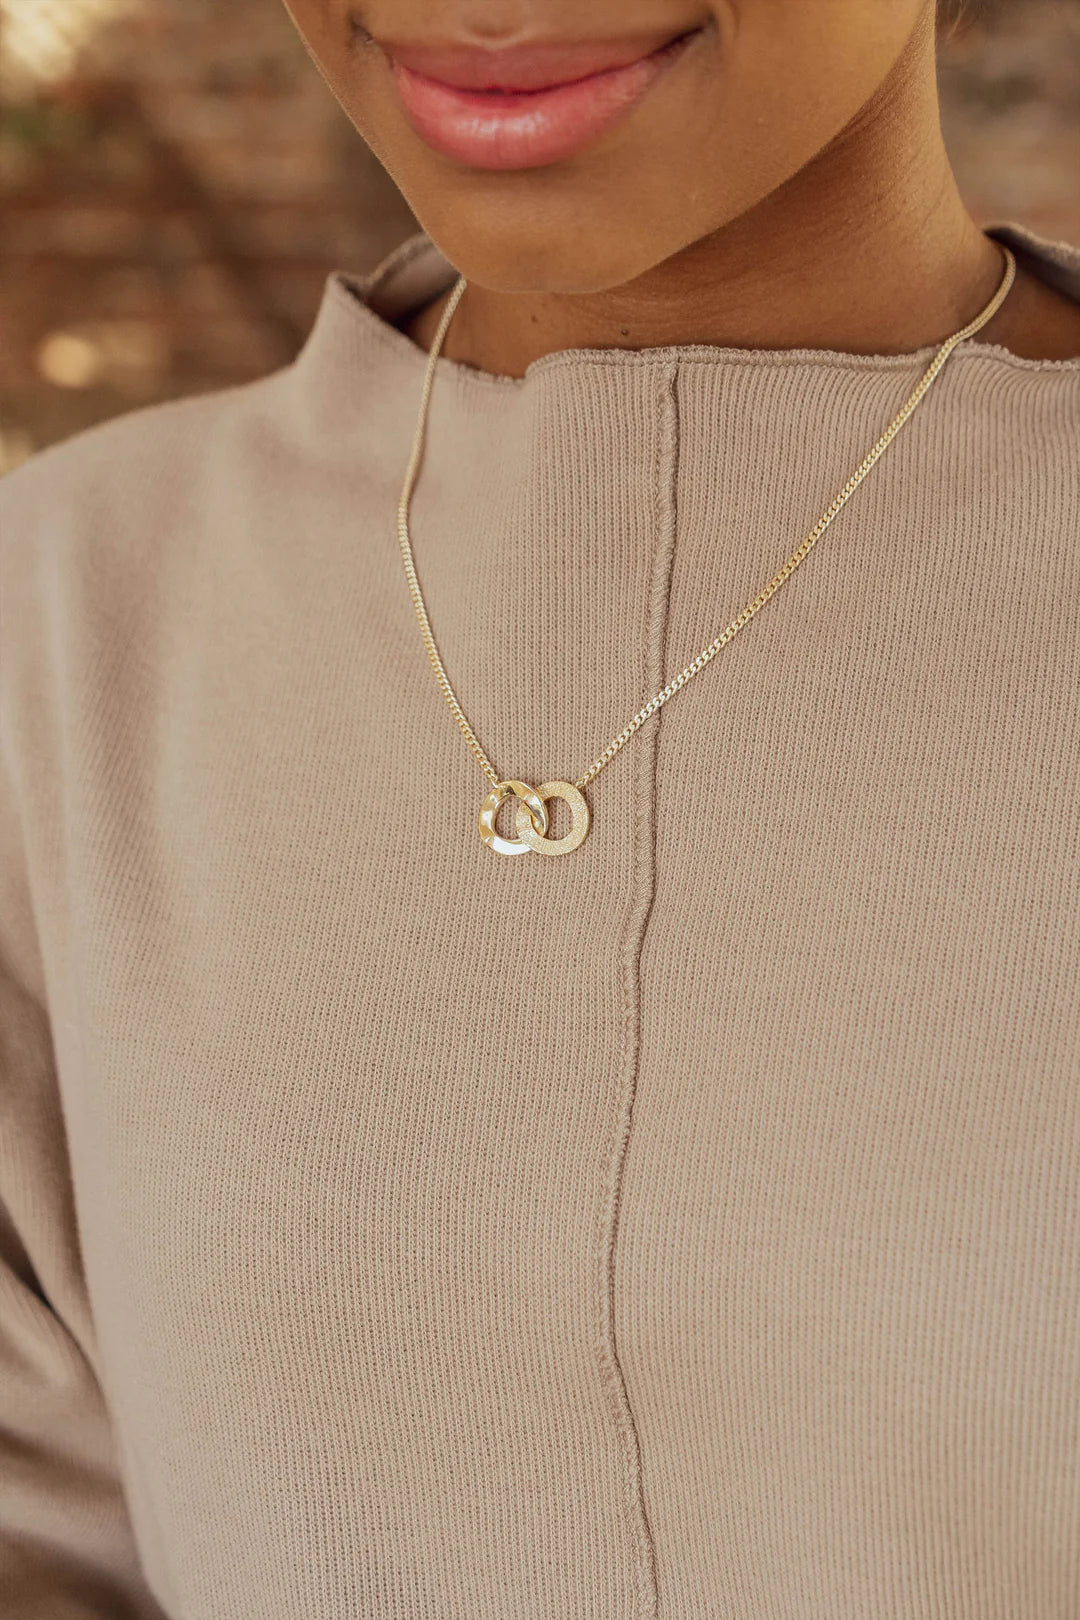 UNITY GOLD NECKLACE